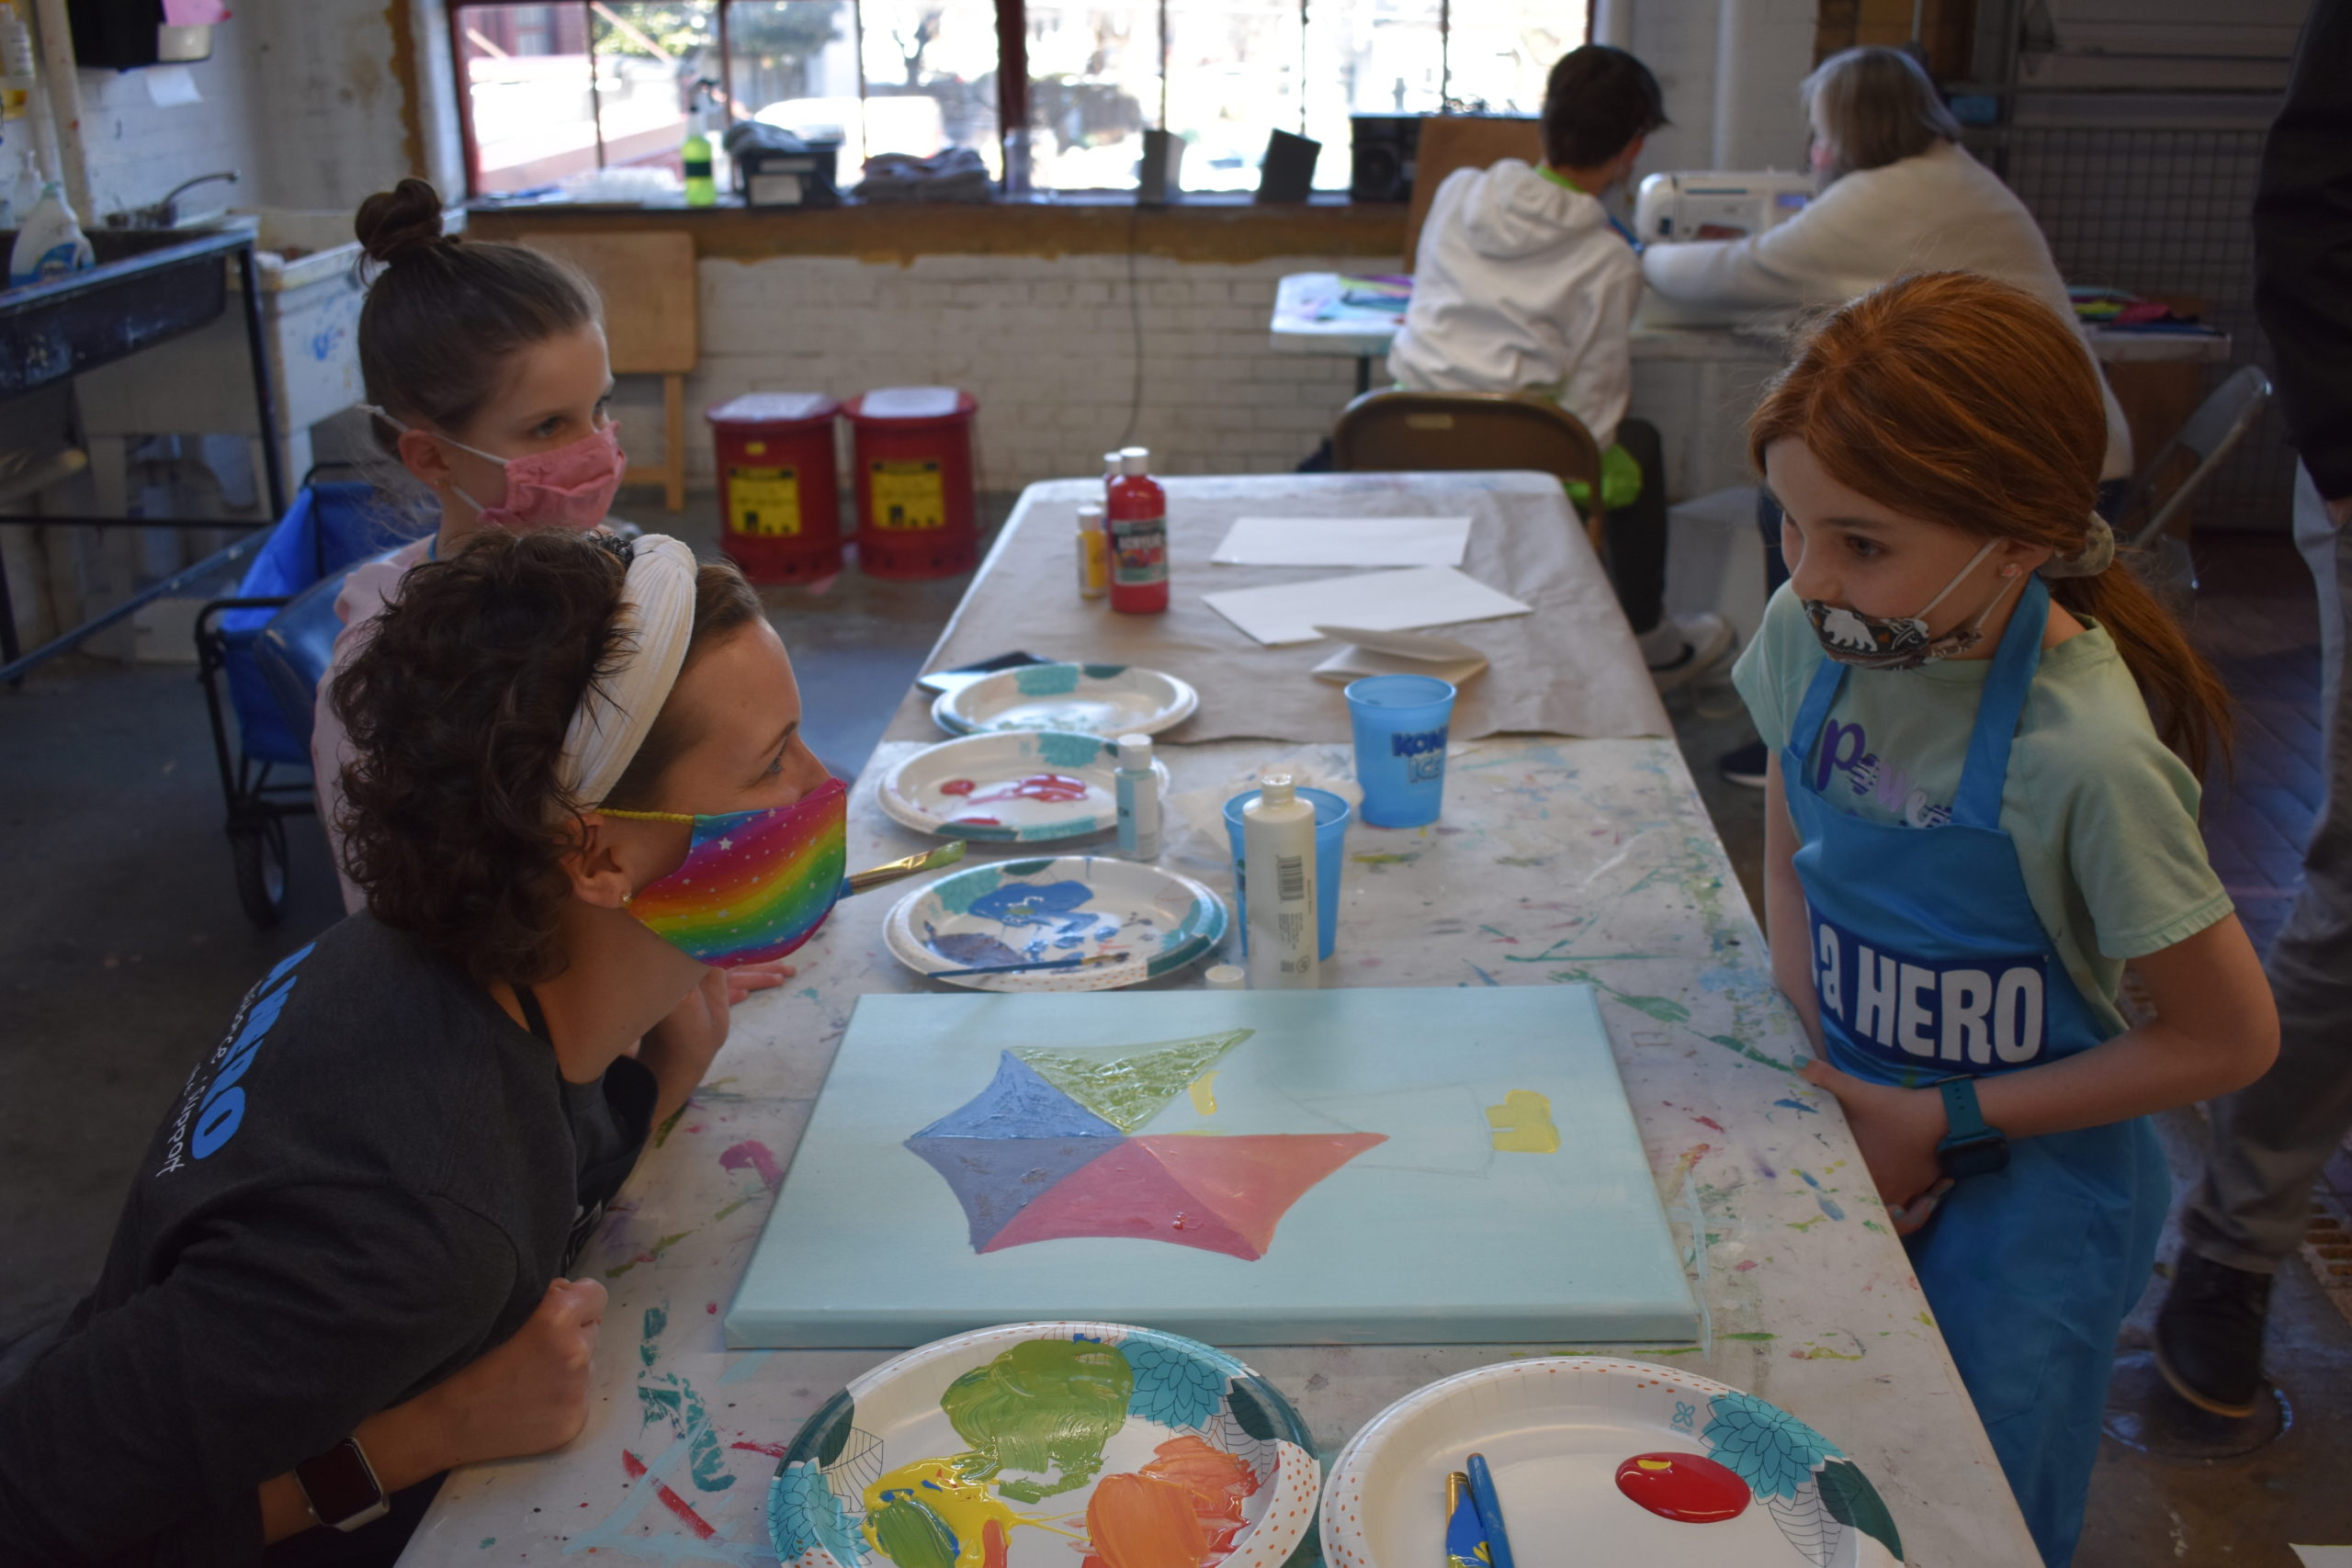 Two children in an art studio working with an adult on a painting